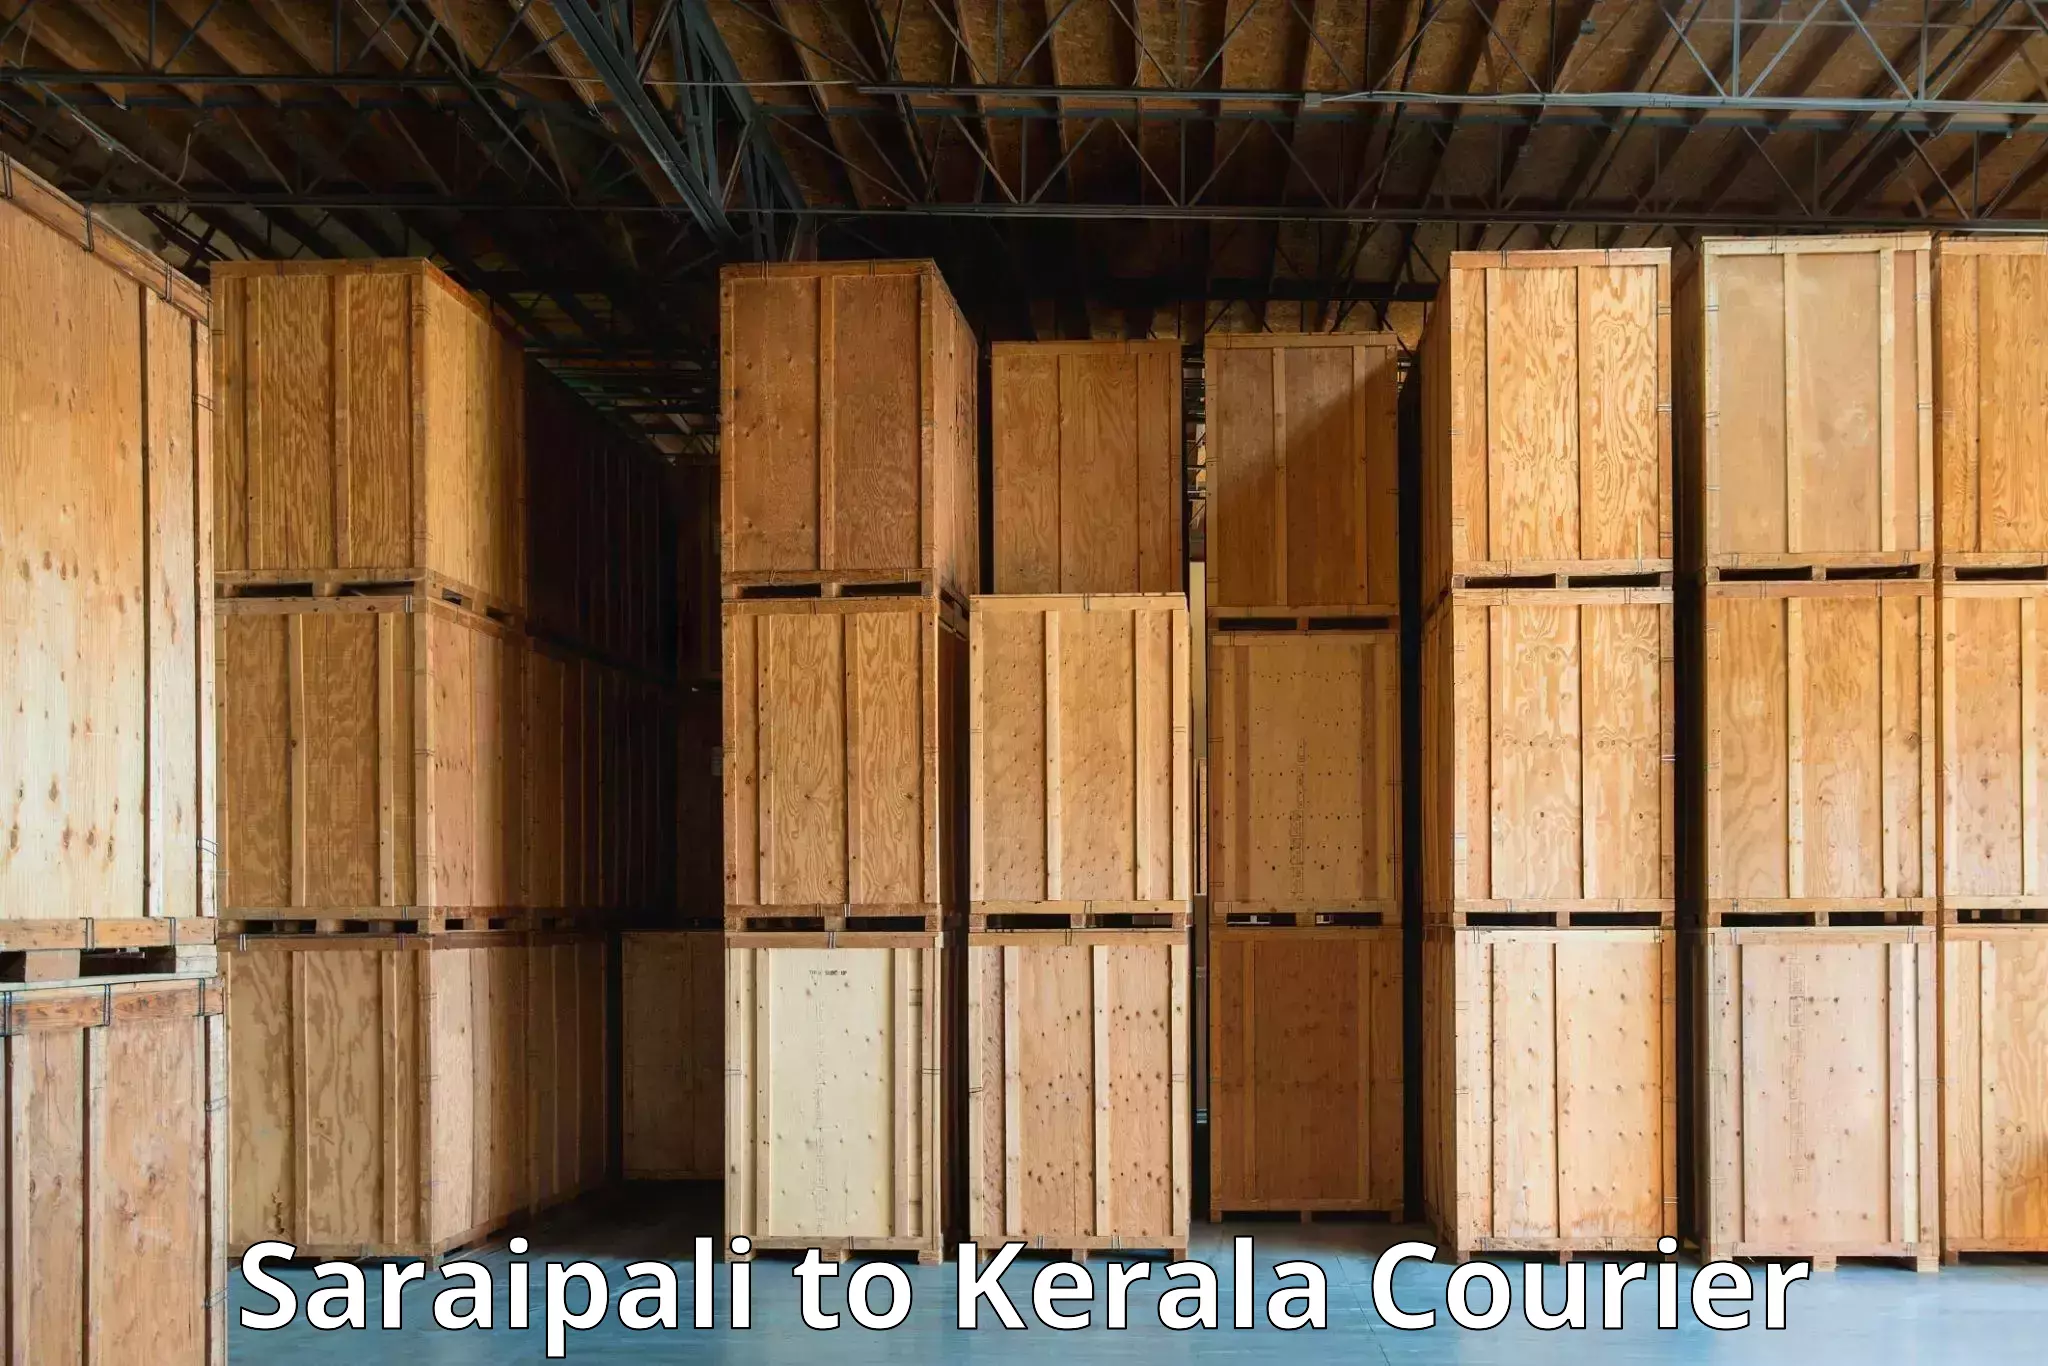 Professional courier services in Saraipali to Cochin Port Kochi